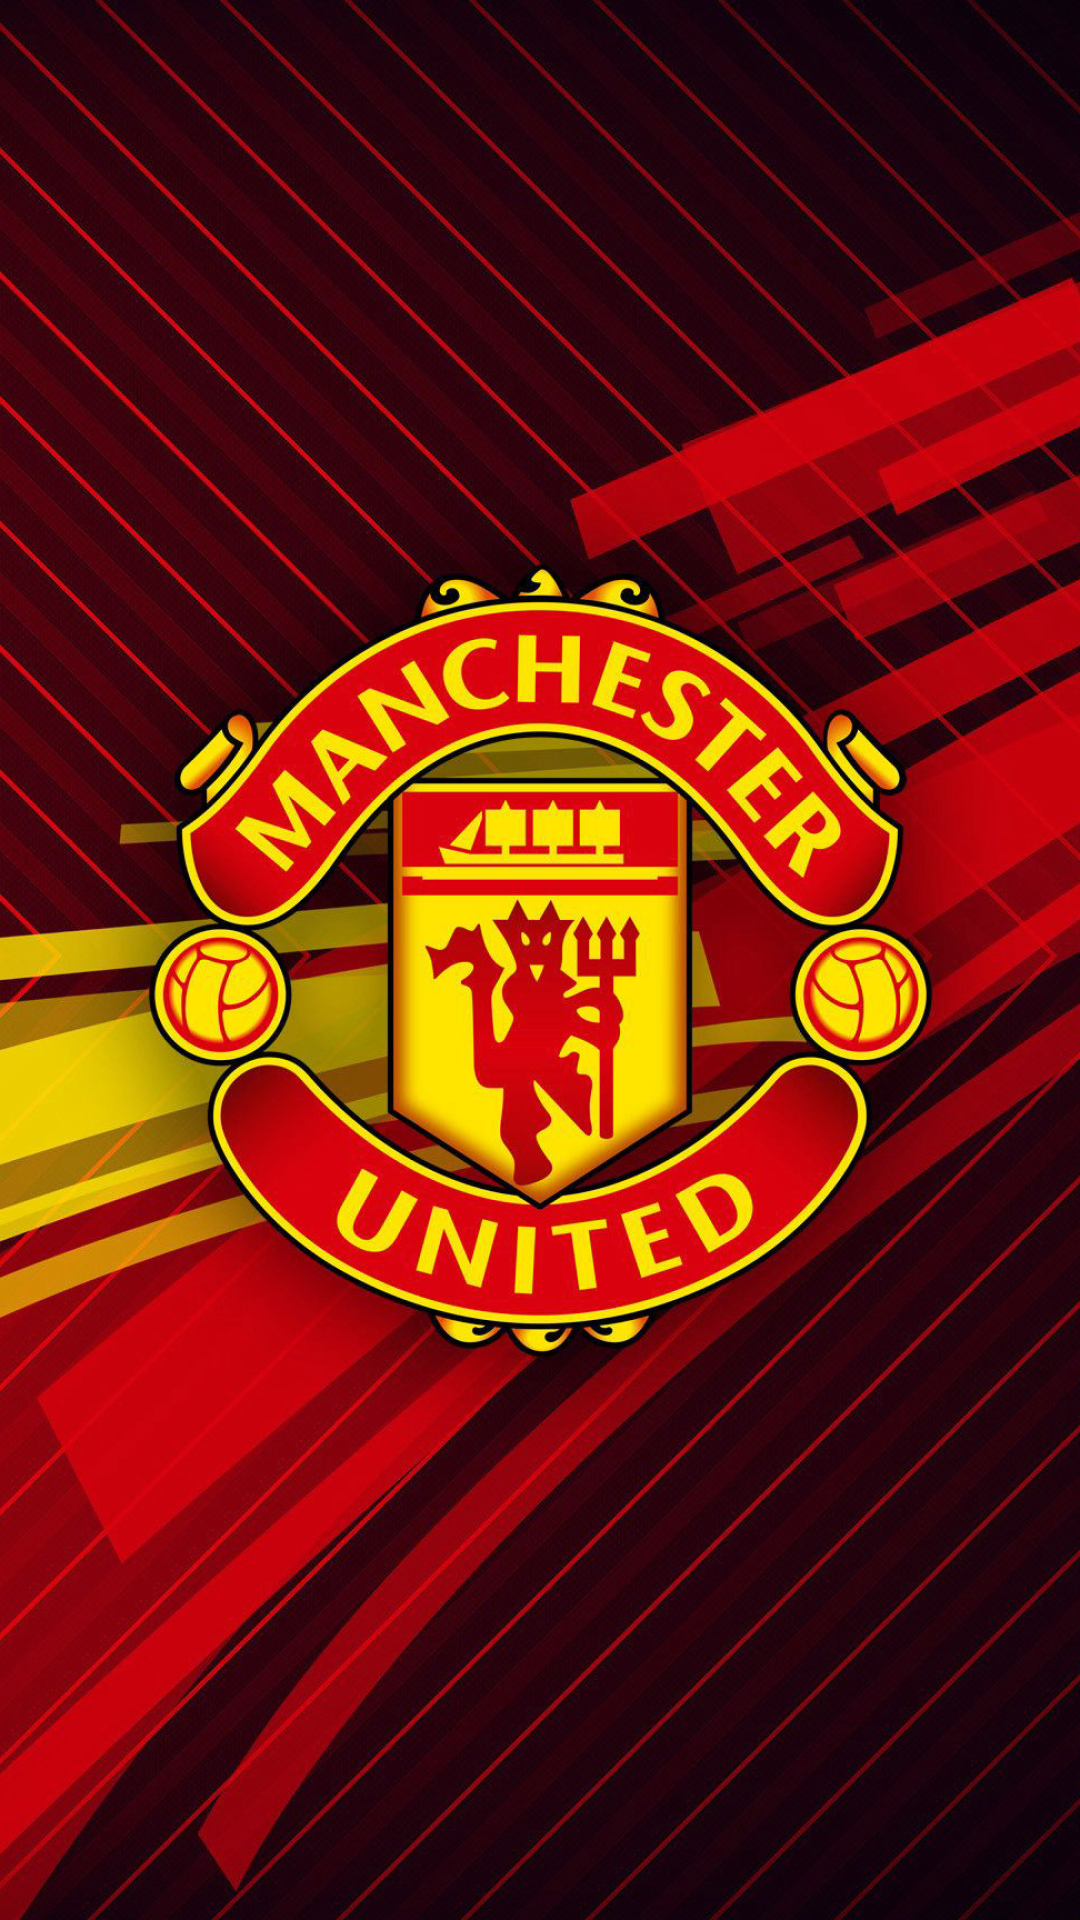 Manchester United: The club achieved a record 19th league title in 2010–11 season. 1080x1920 Full HD Wallpaper.